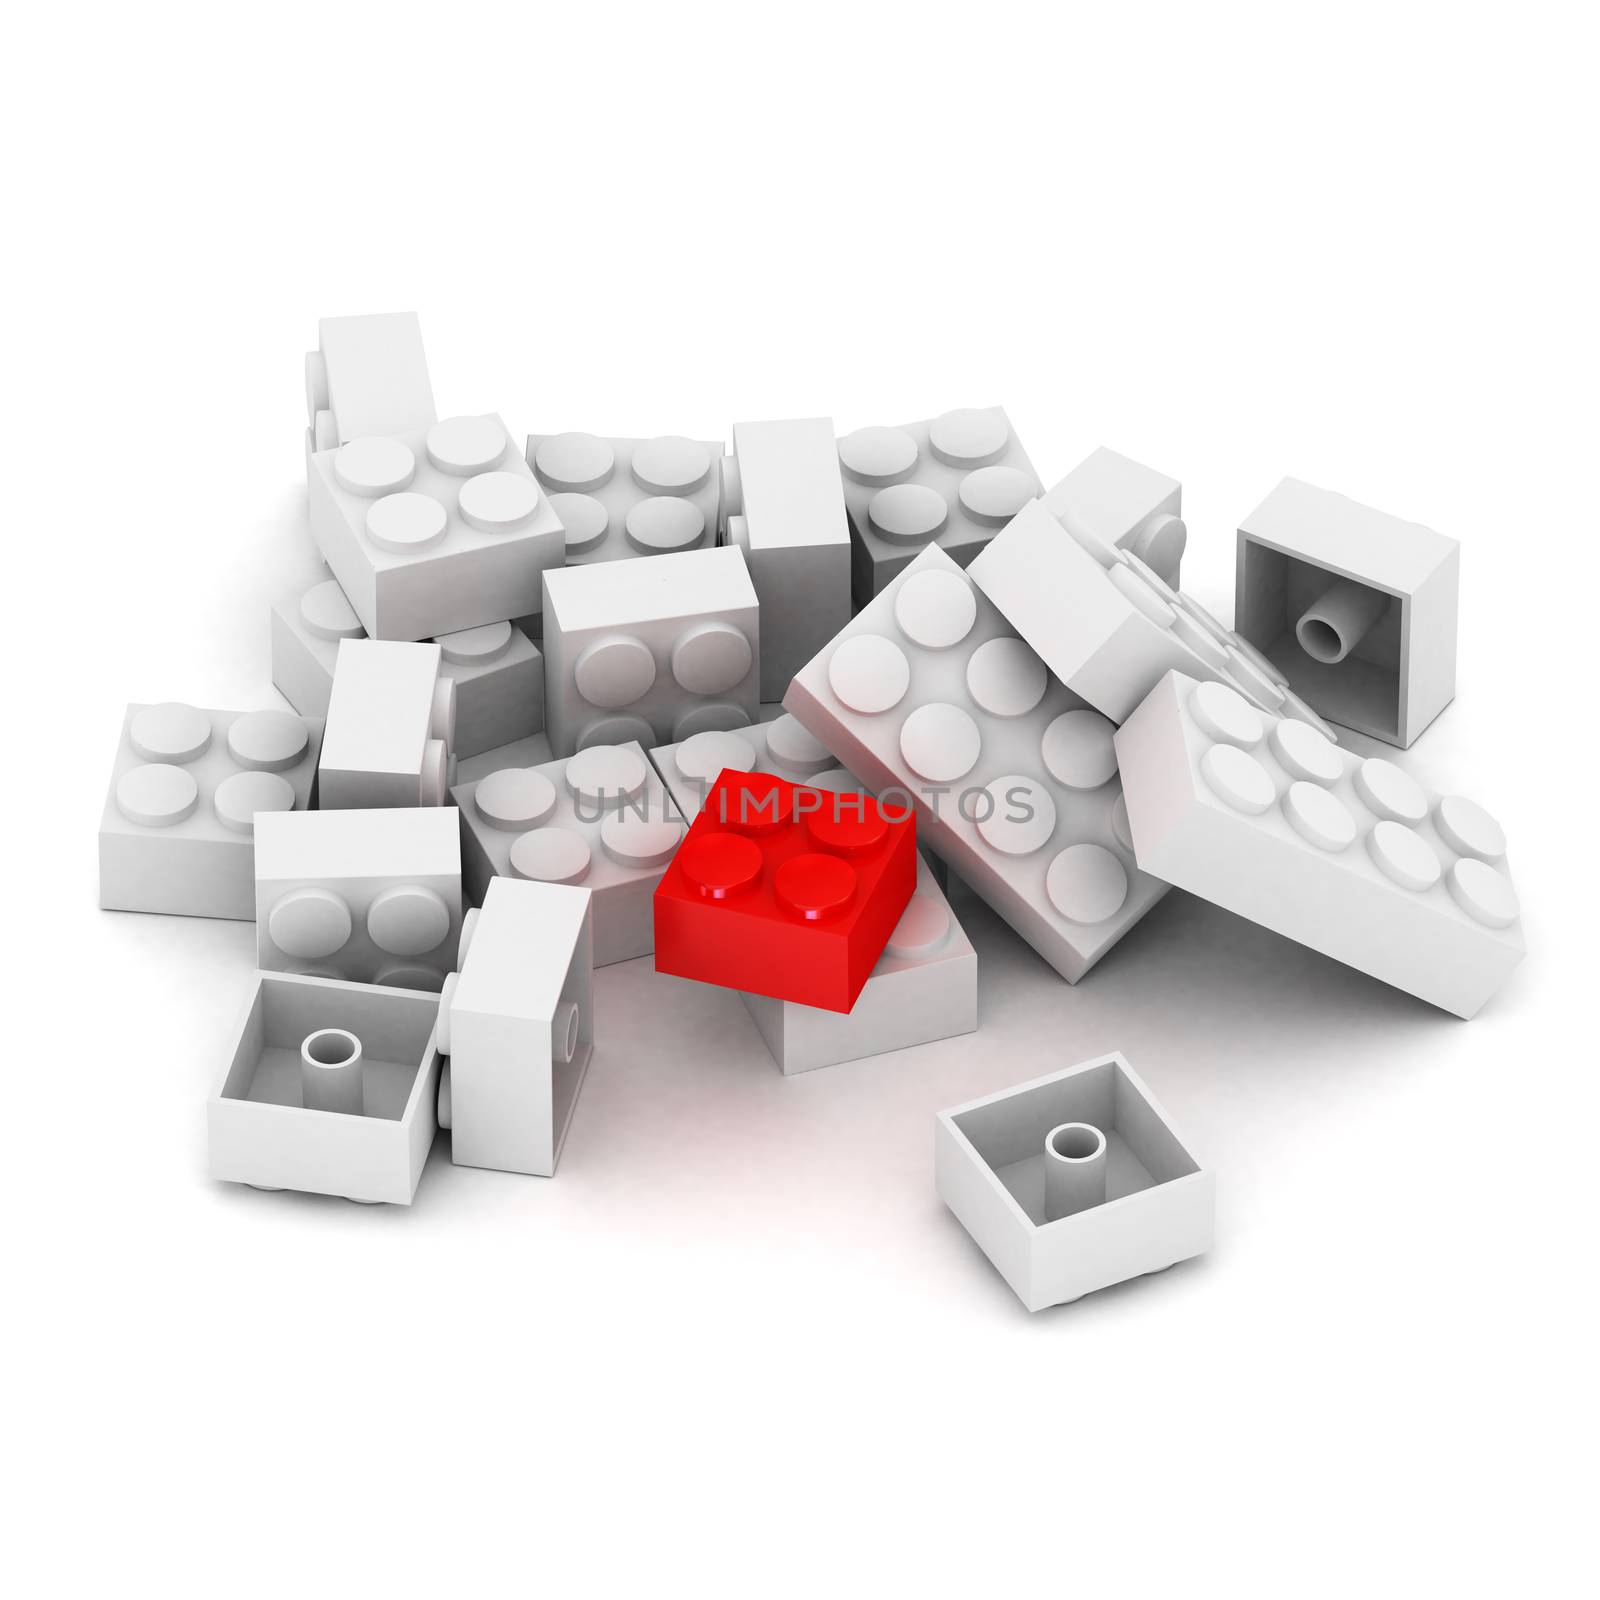 A Colourful 3d Rendered Illustration of Building Blocks that can be used to show leadership or Individualality